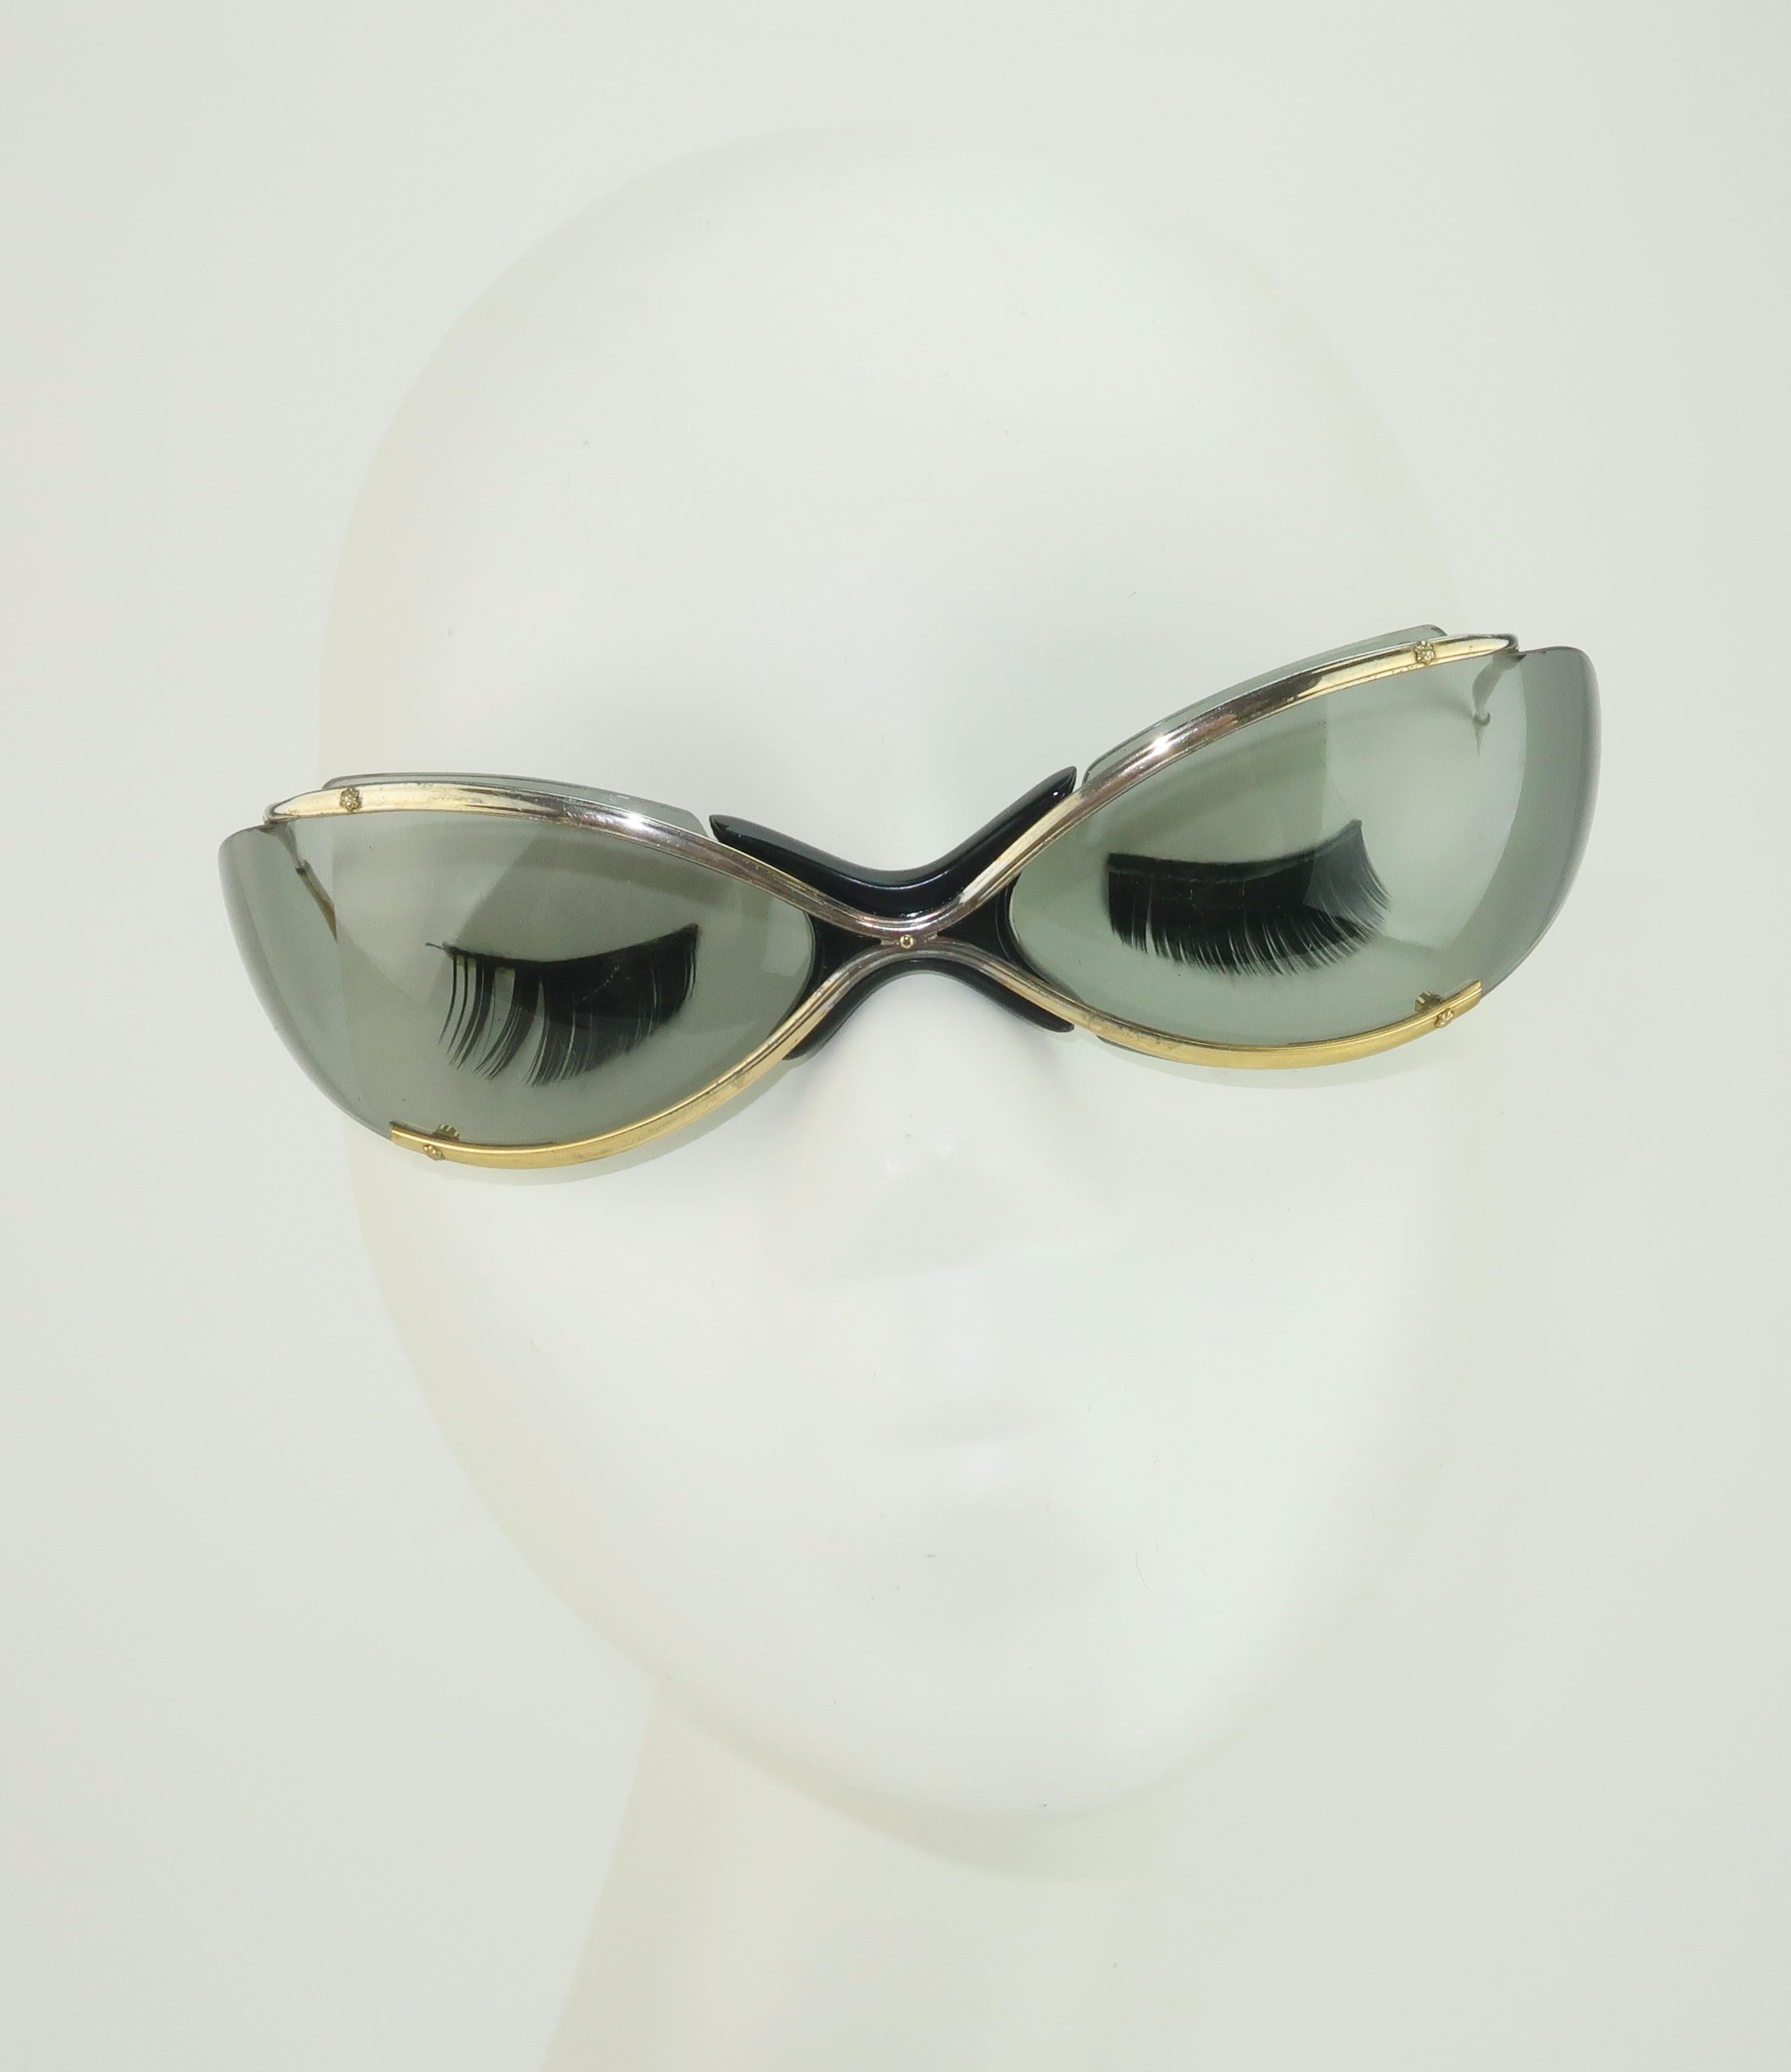 This design may be de rigueur in contemporary eye wear but in the 1960's Renauld of France made a splash with sporty wrap around sunglasses.  Popular among sports enthusiasts including skiers and race car drivers, the space age shape proved both